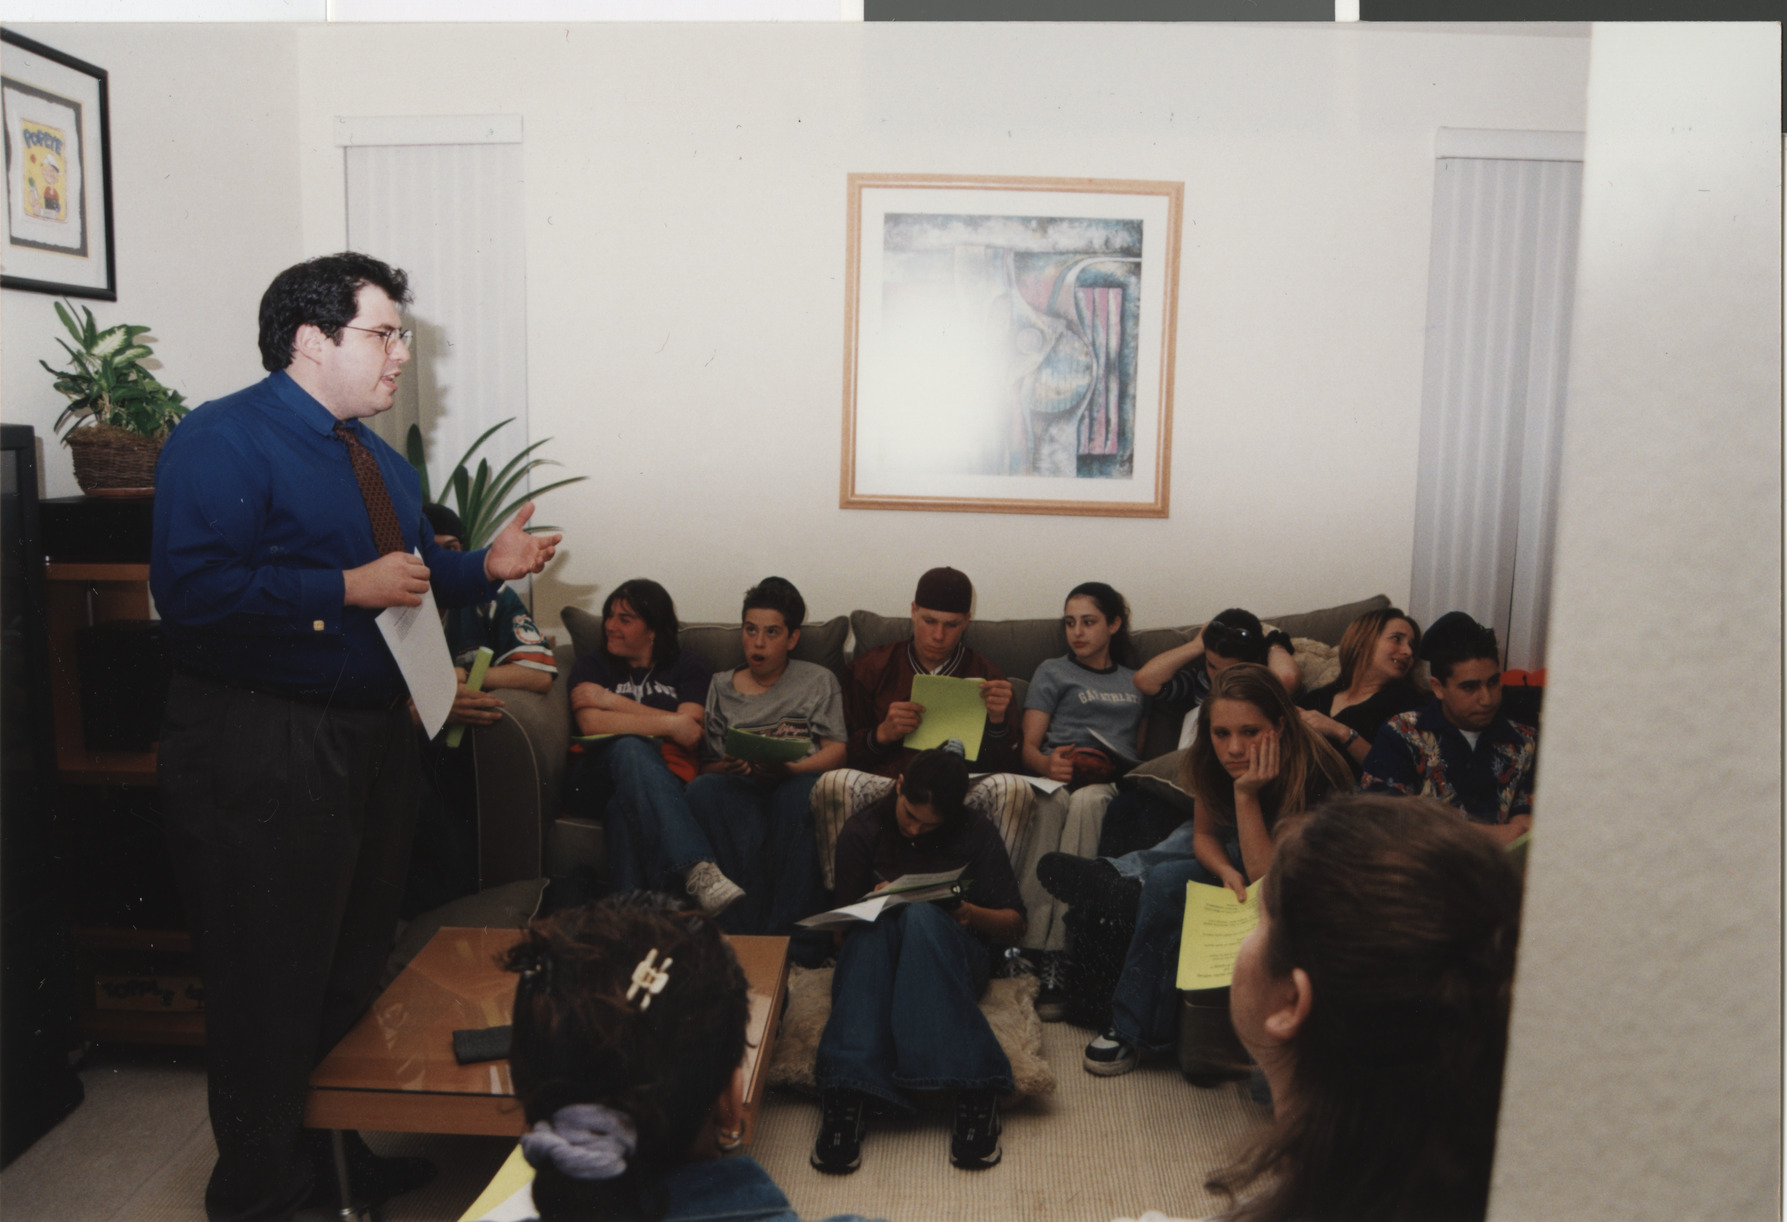 Photograph of Rabbi Goodman speaking to young adults, 1990s